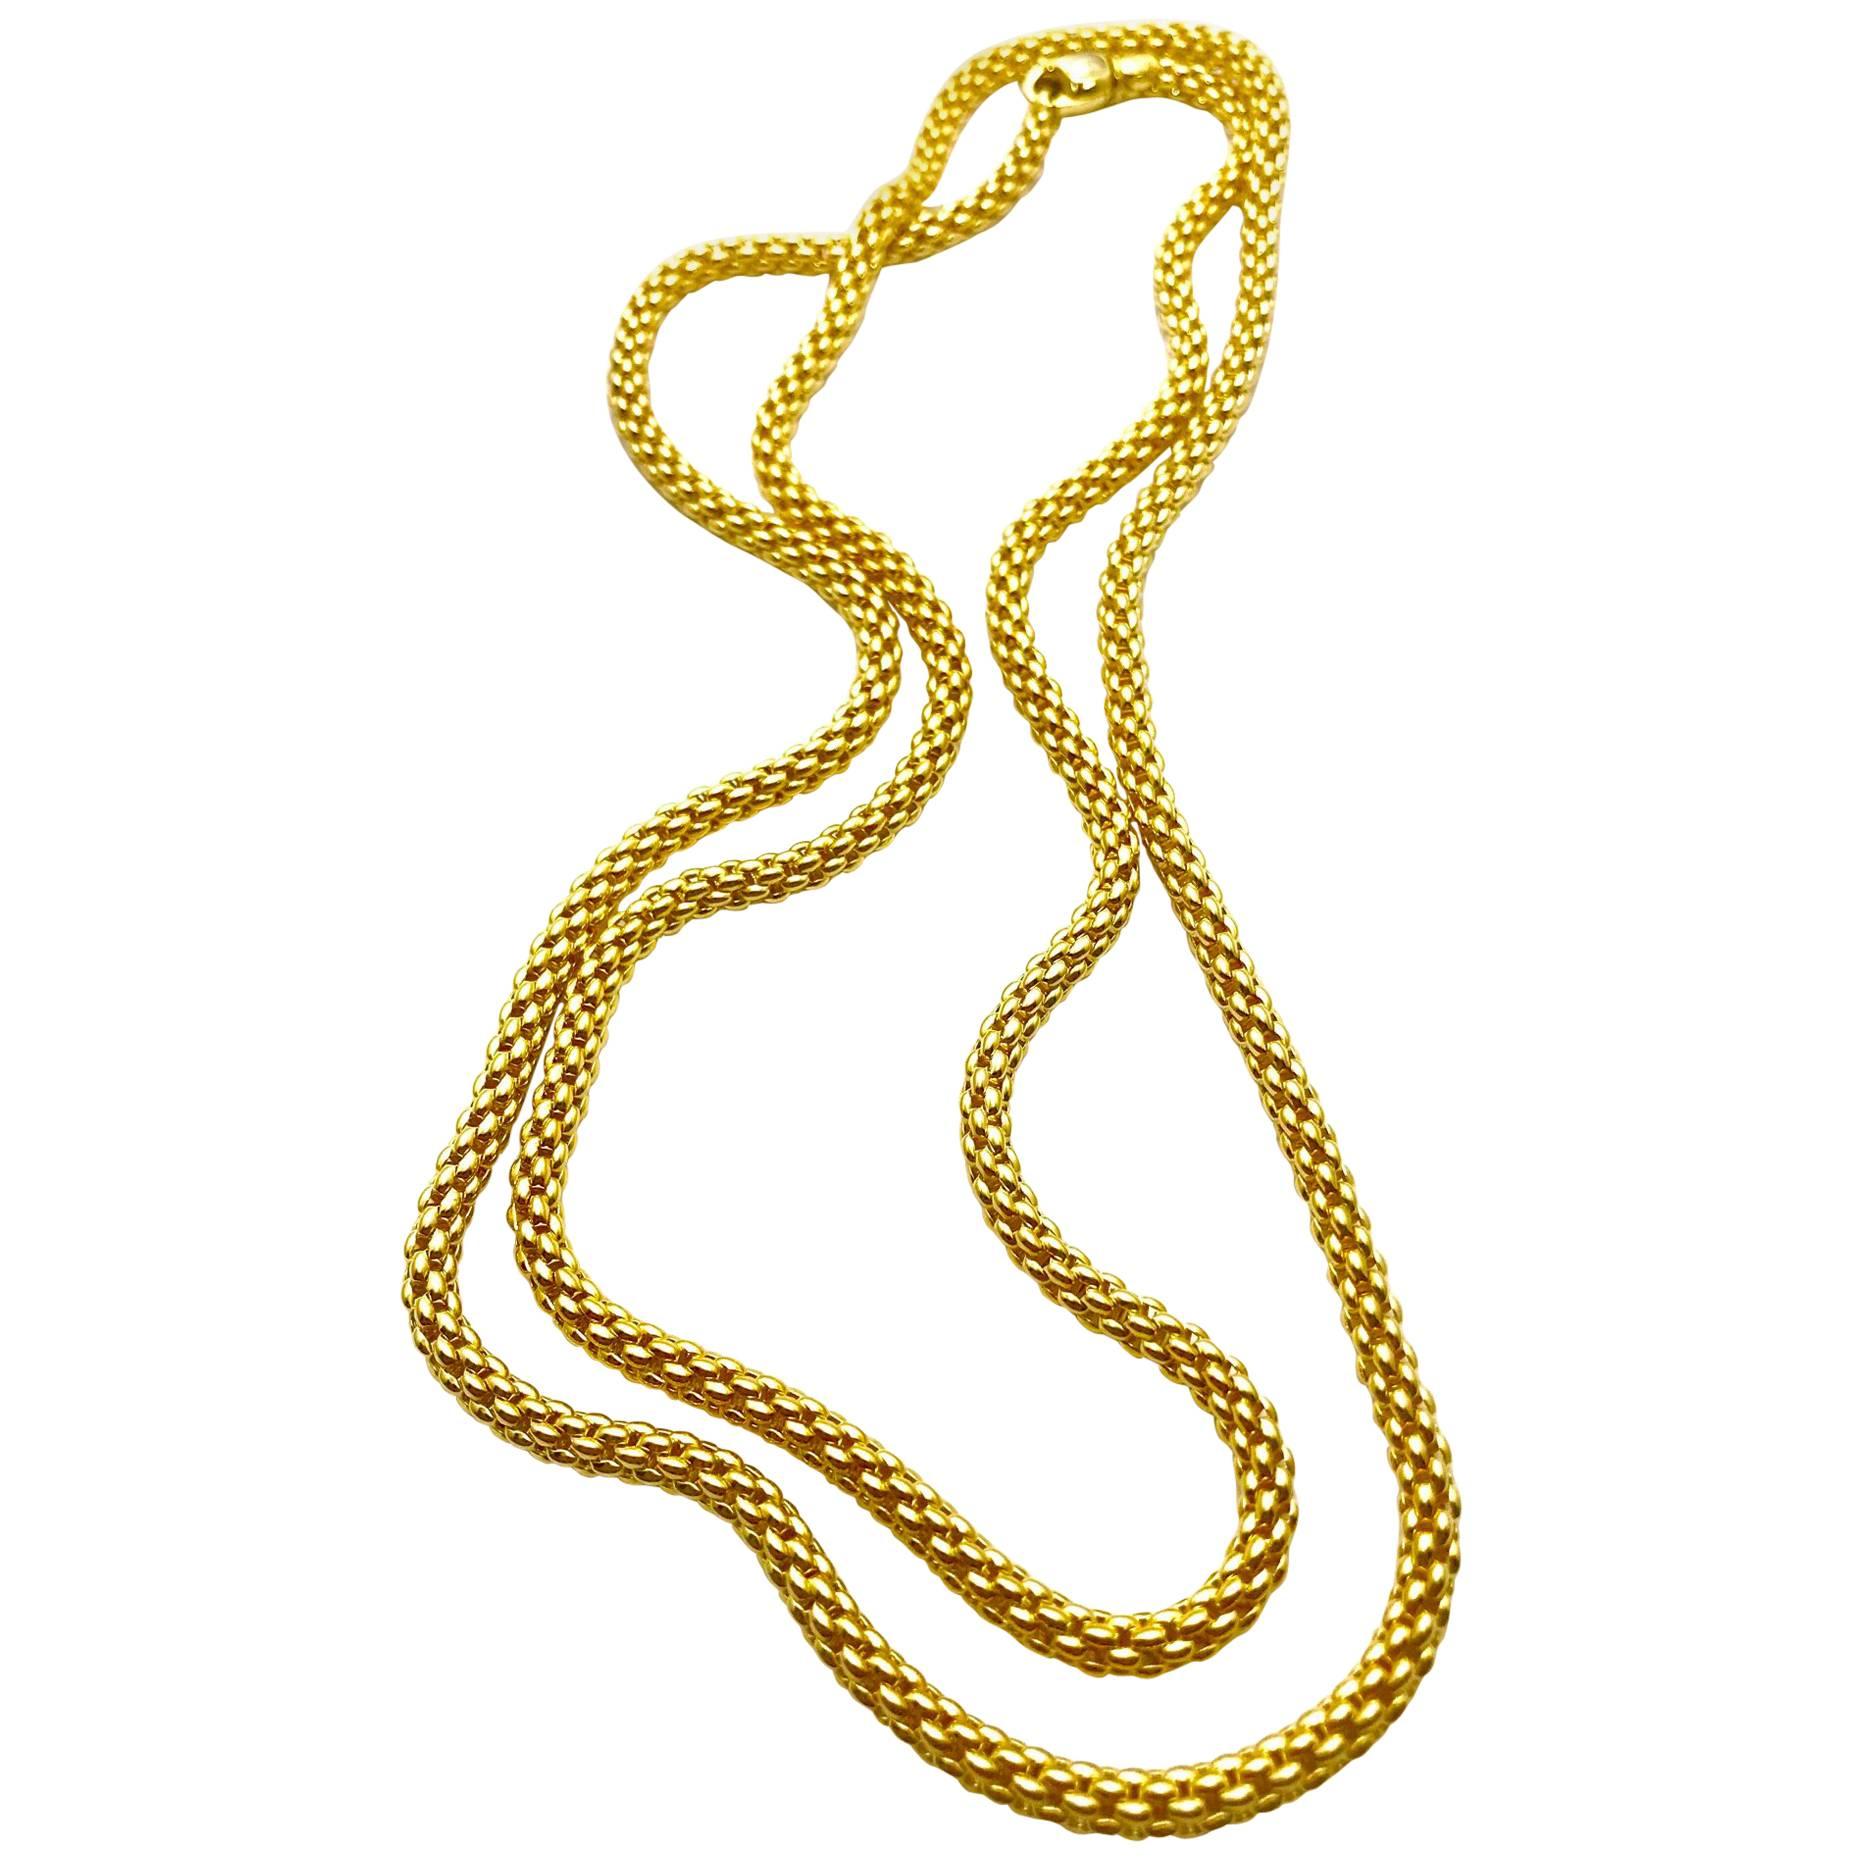 Fope Vendome Woven Yellow Gold Italian Made Necklace